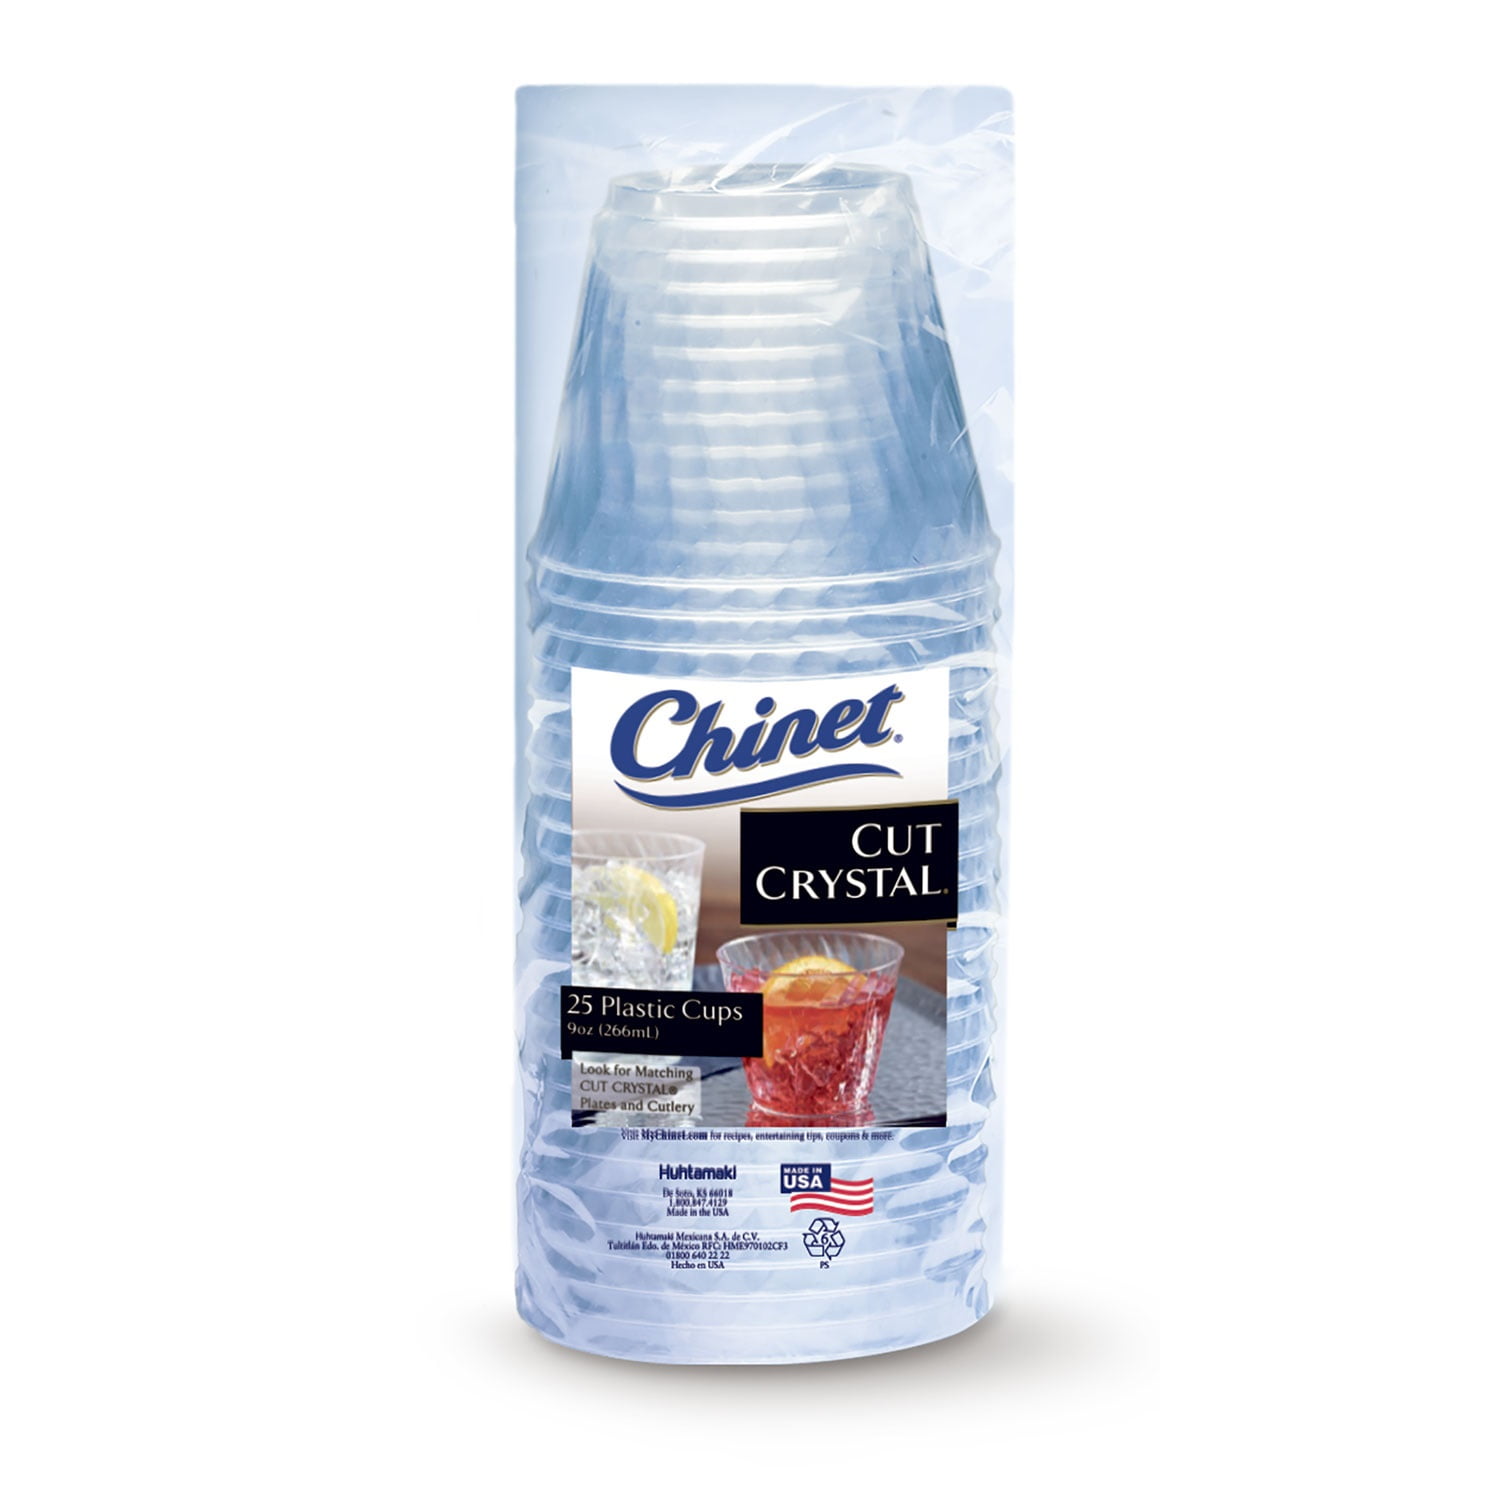 Chinet Cut Crystal Holiday 9-Ounce Plastic Cups, 25 ct - Kroger